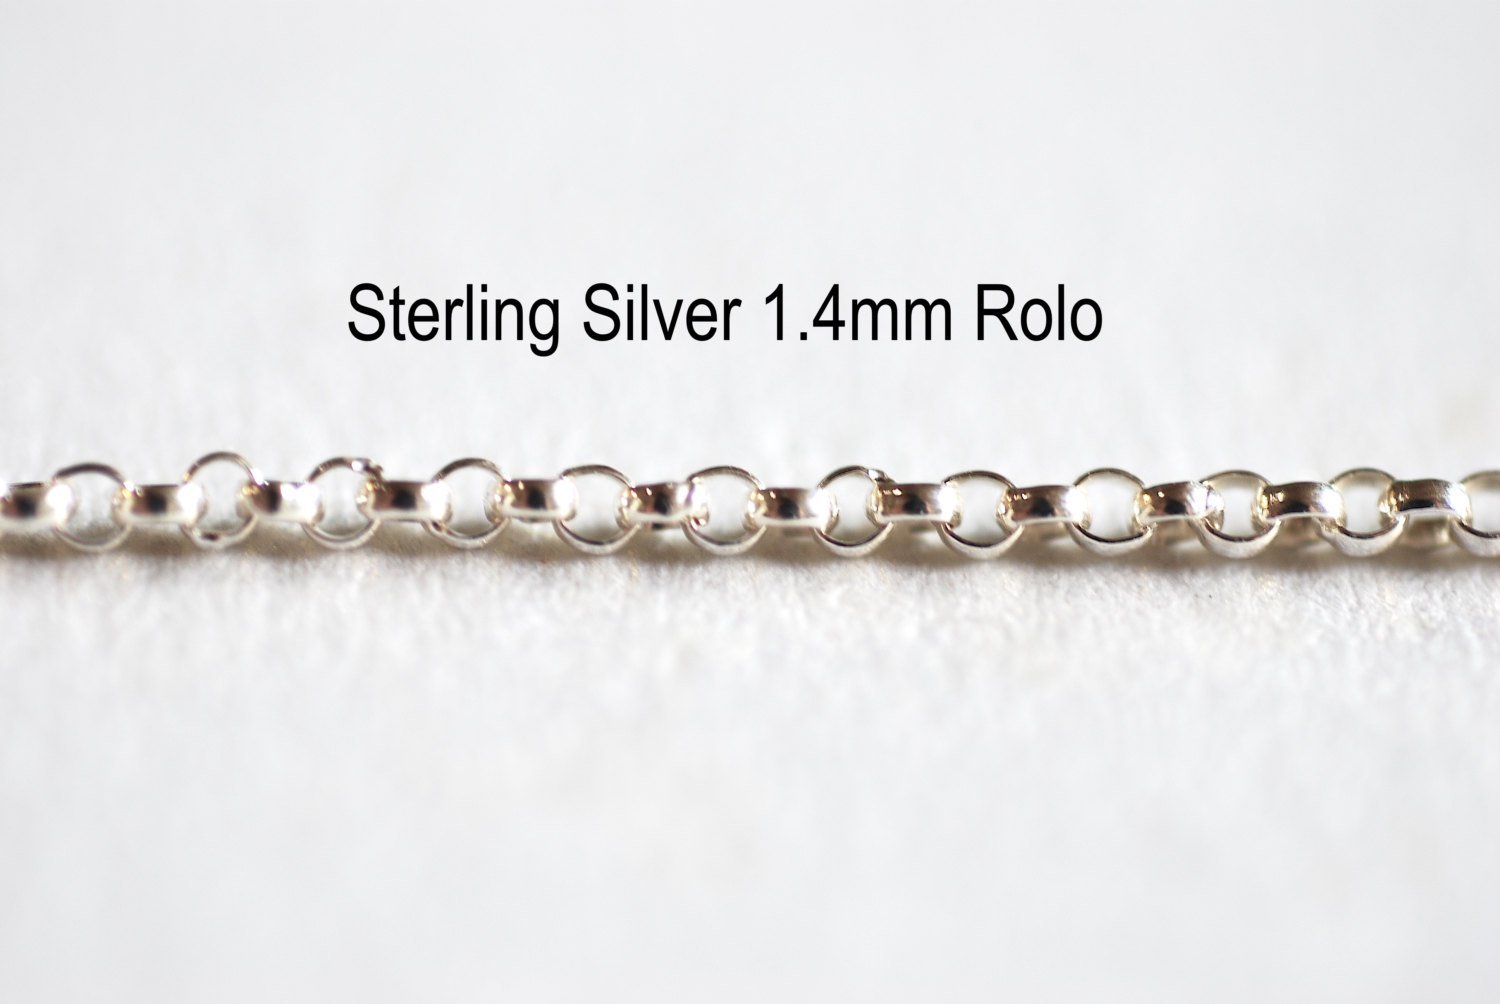 1.4mm Rolo Chain, Gold-Filled or Sterling Silver, Unfinished Rolo Chain by Foot Bulk Chain